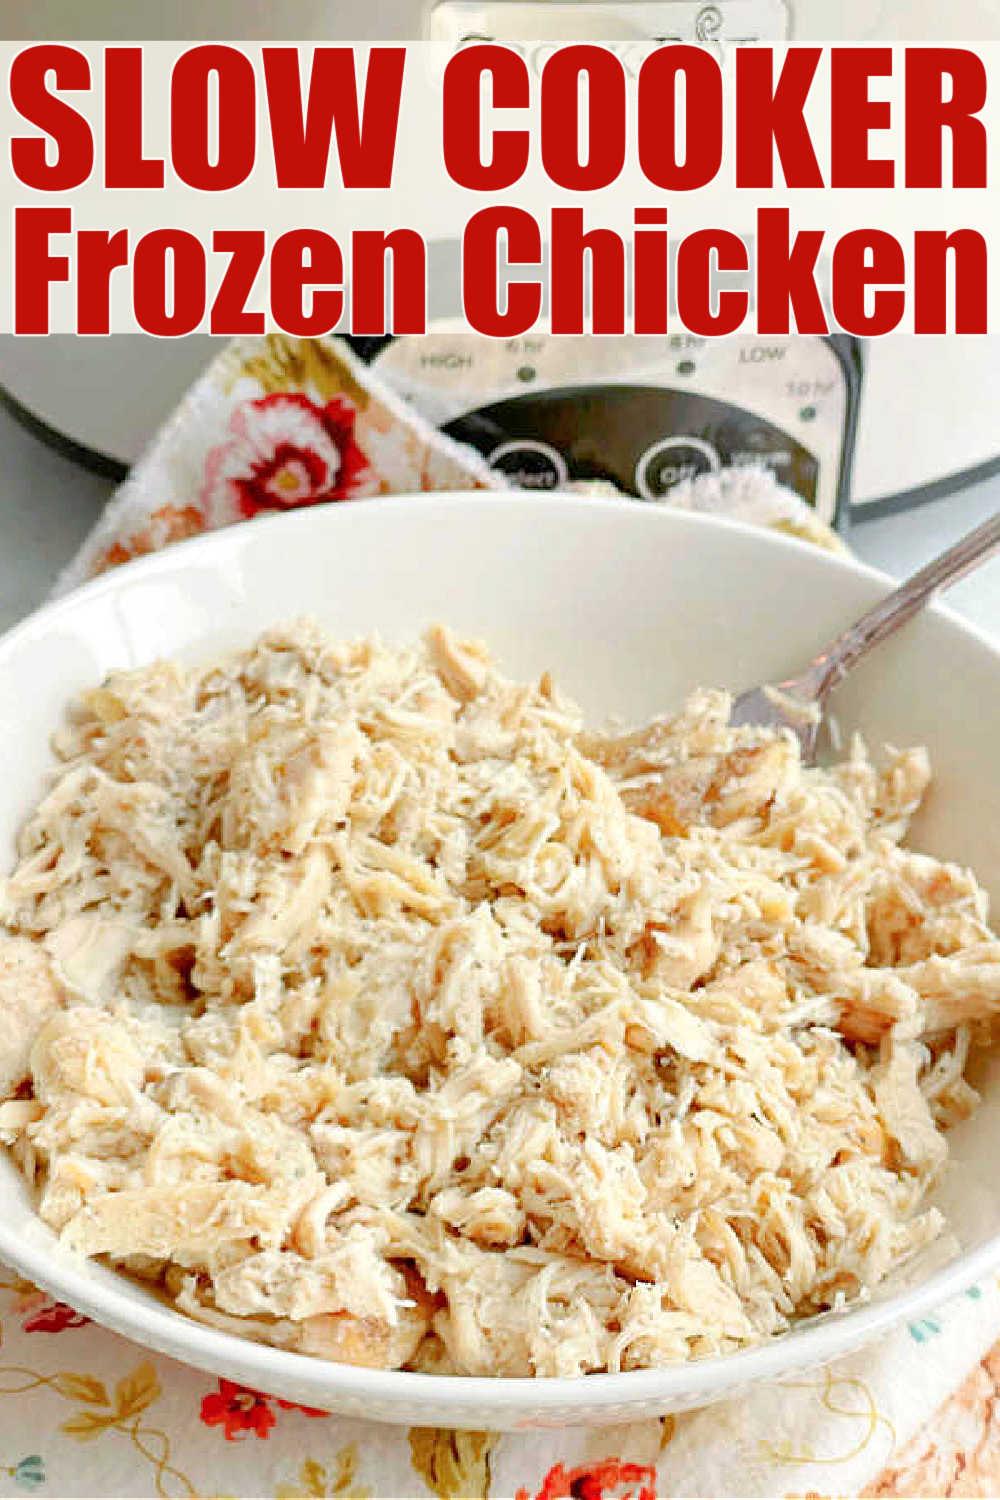 How to Make Frozen Chicken in the Crock Pot